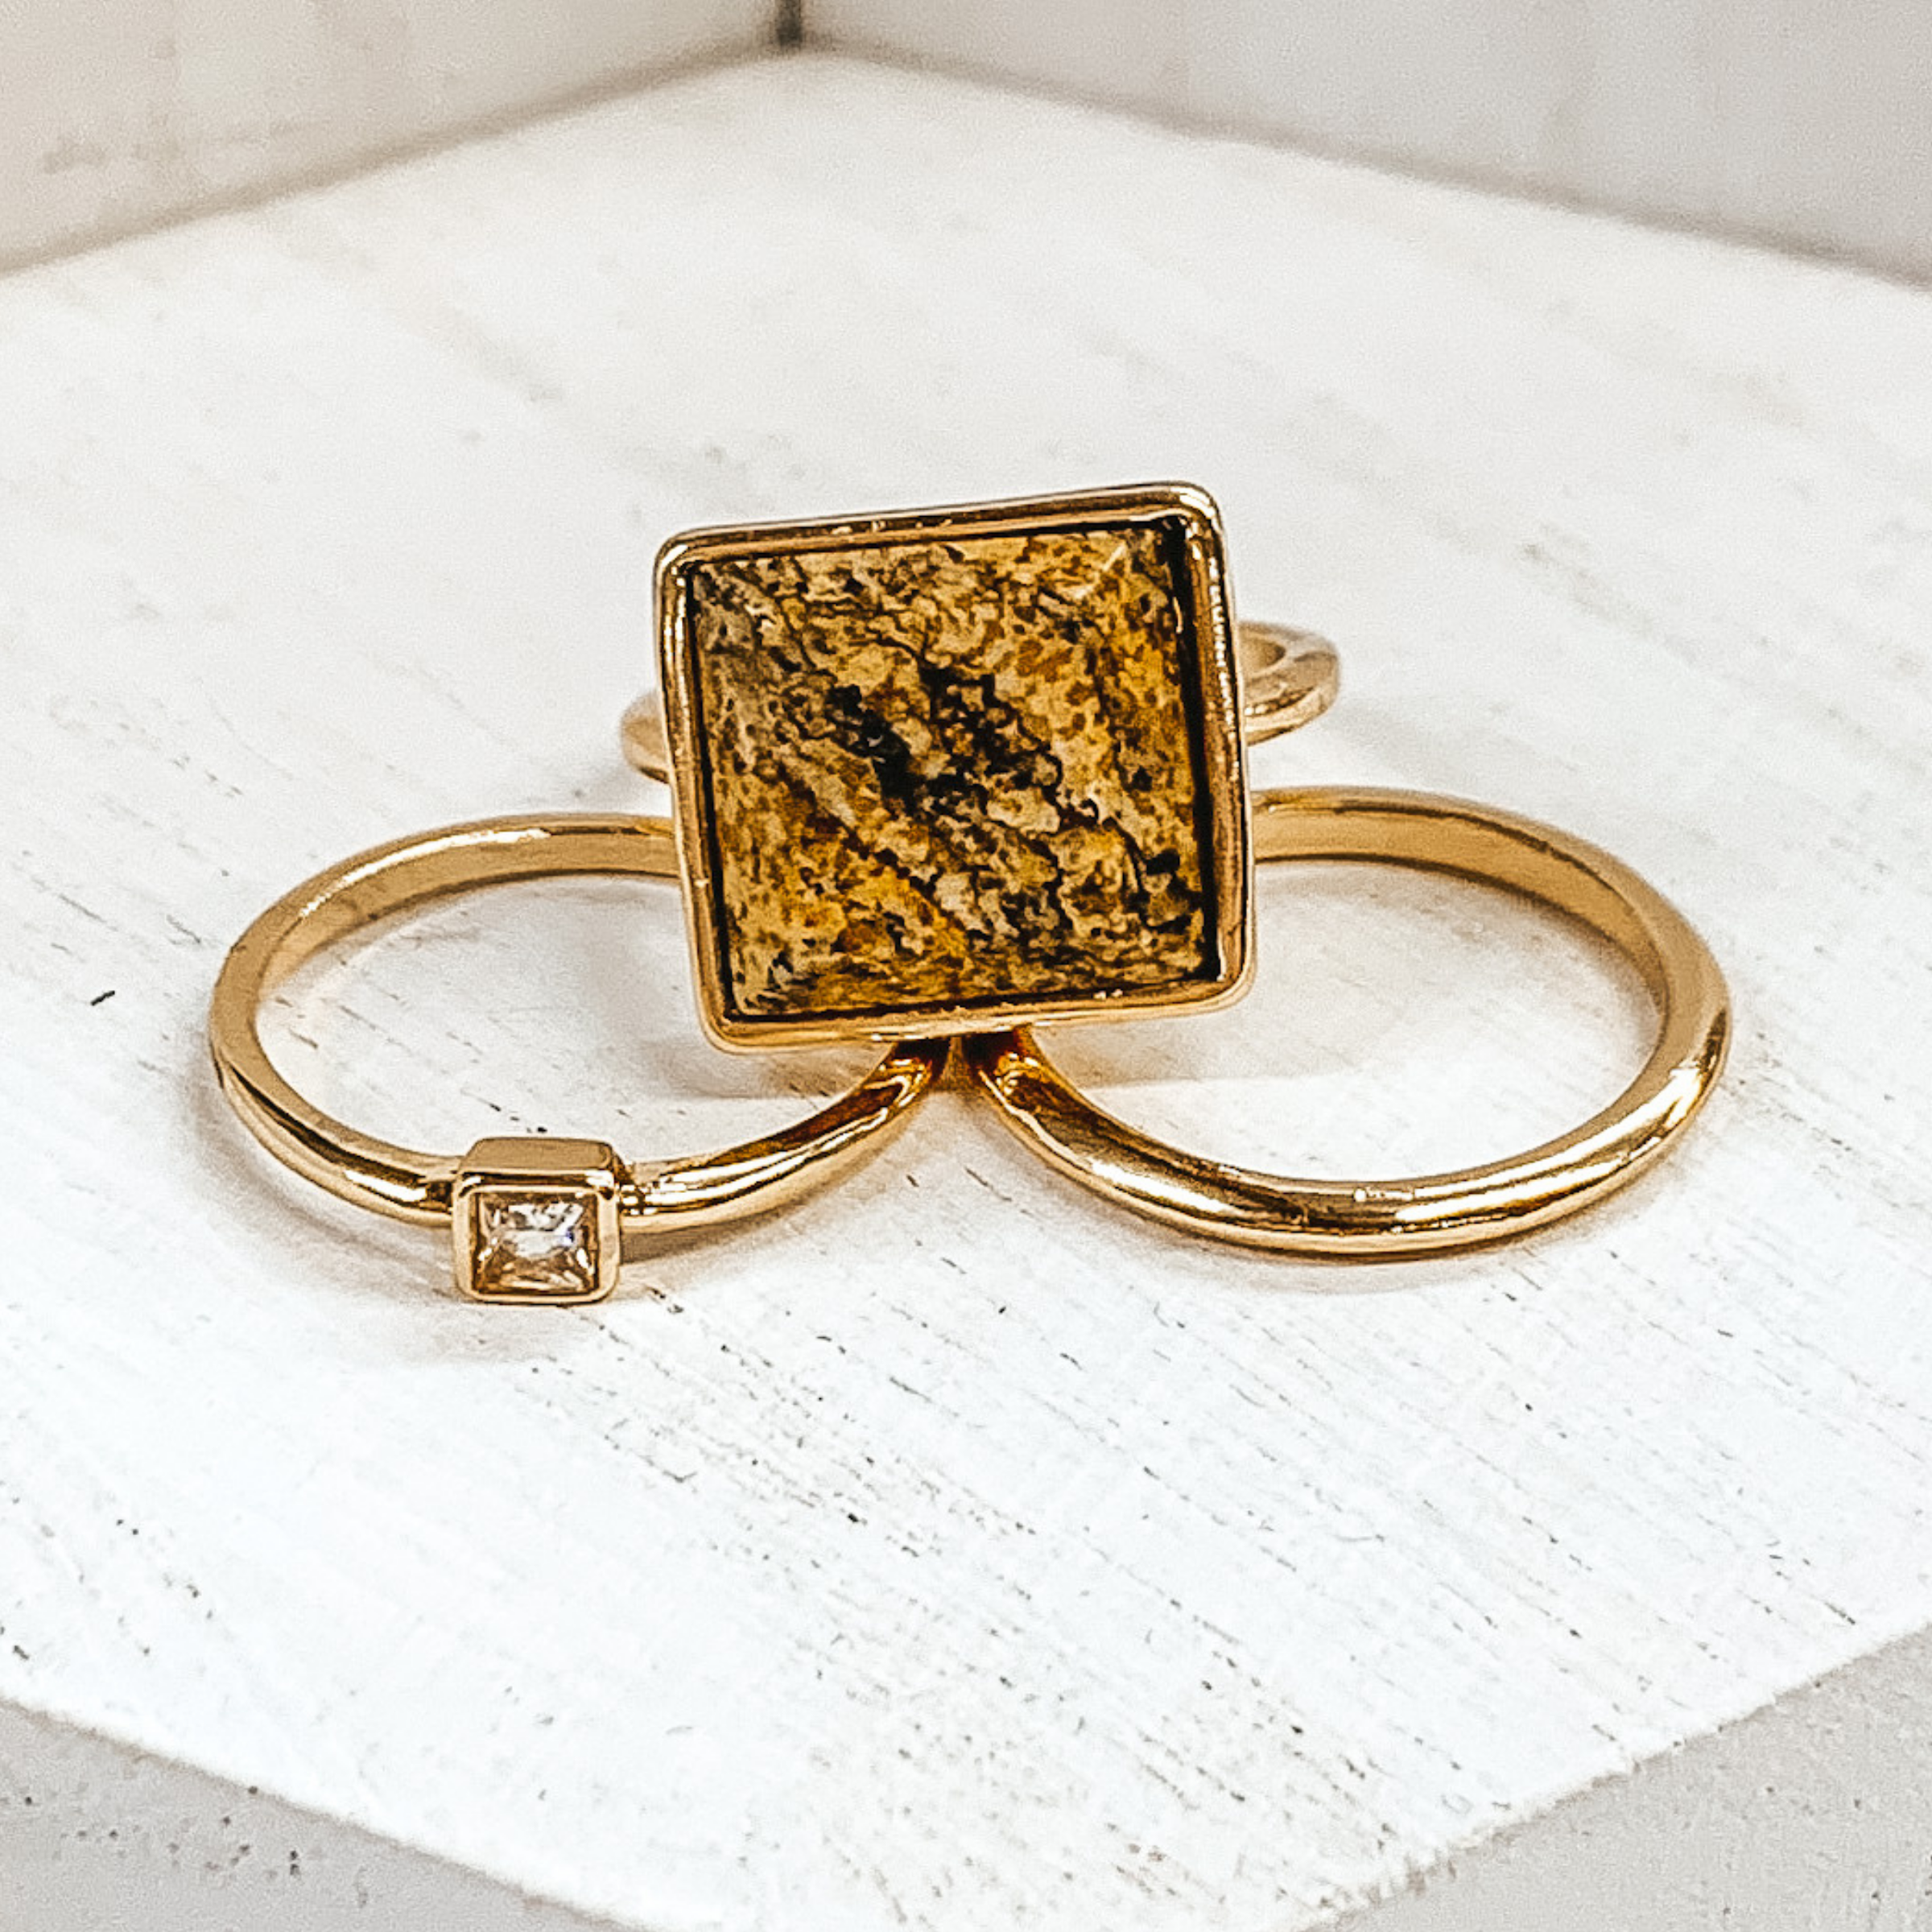 Set of three gold rings. One ring is a plain gold band. Another has a small square pendant with a center crystal. The third ring has a big, tan marbled pendant. These rings are pictured on a white background.  